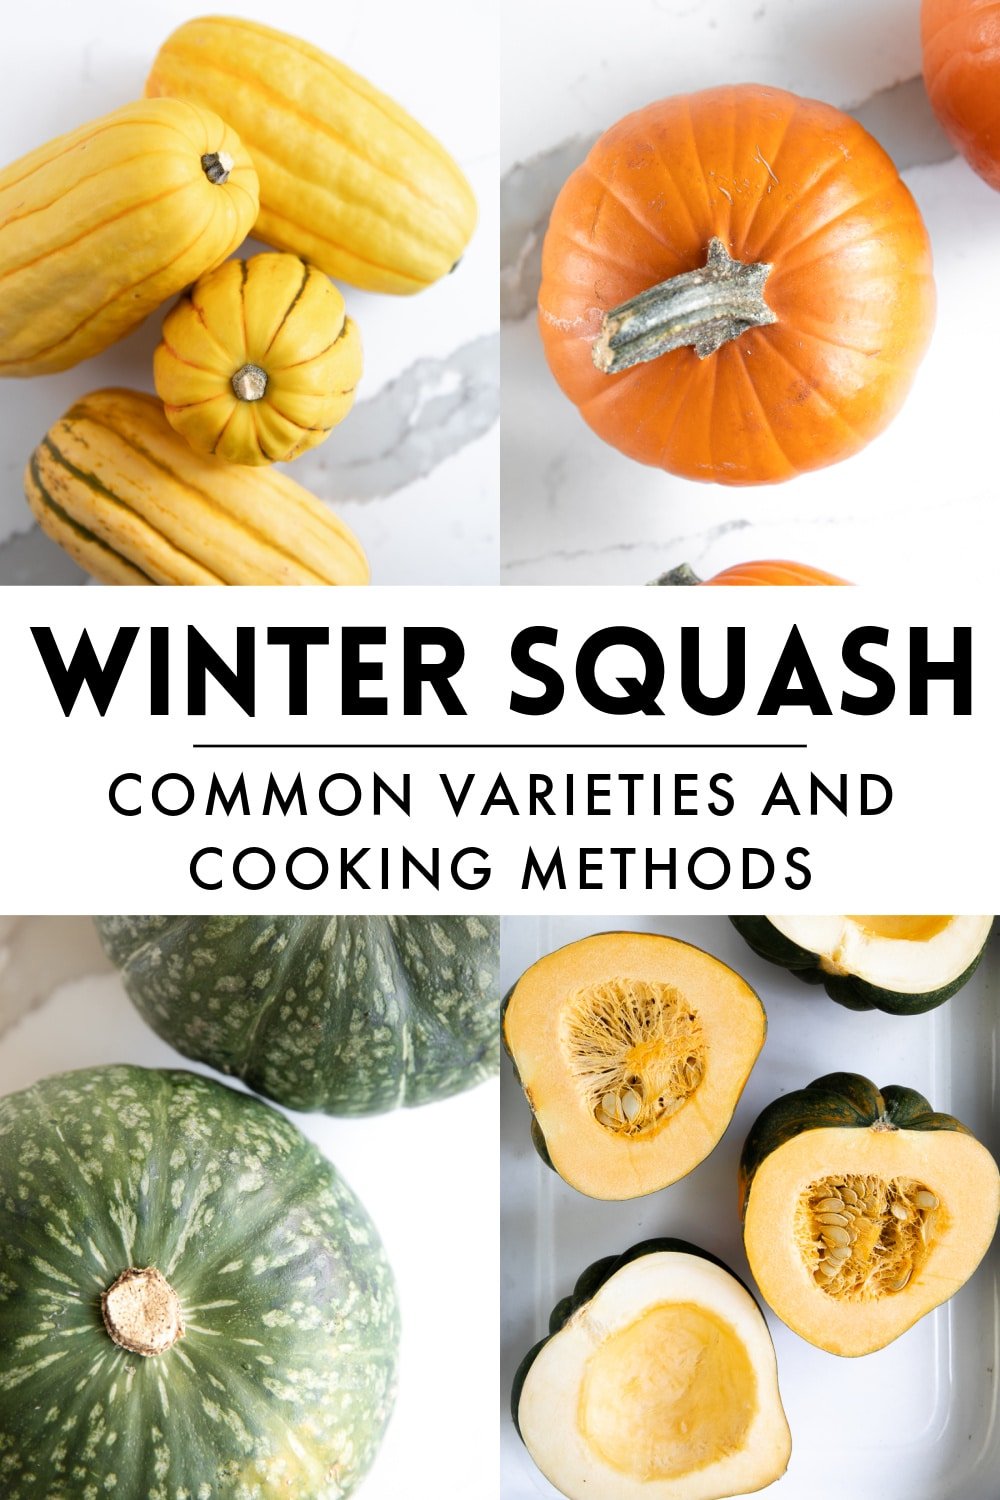 Types Of Winter Squash A Guide To Winter Squash Varieties And Cooking Methods The Forked Spoon